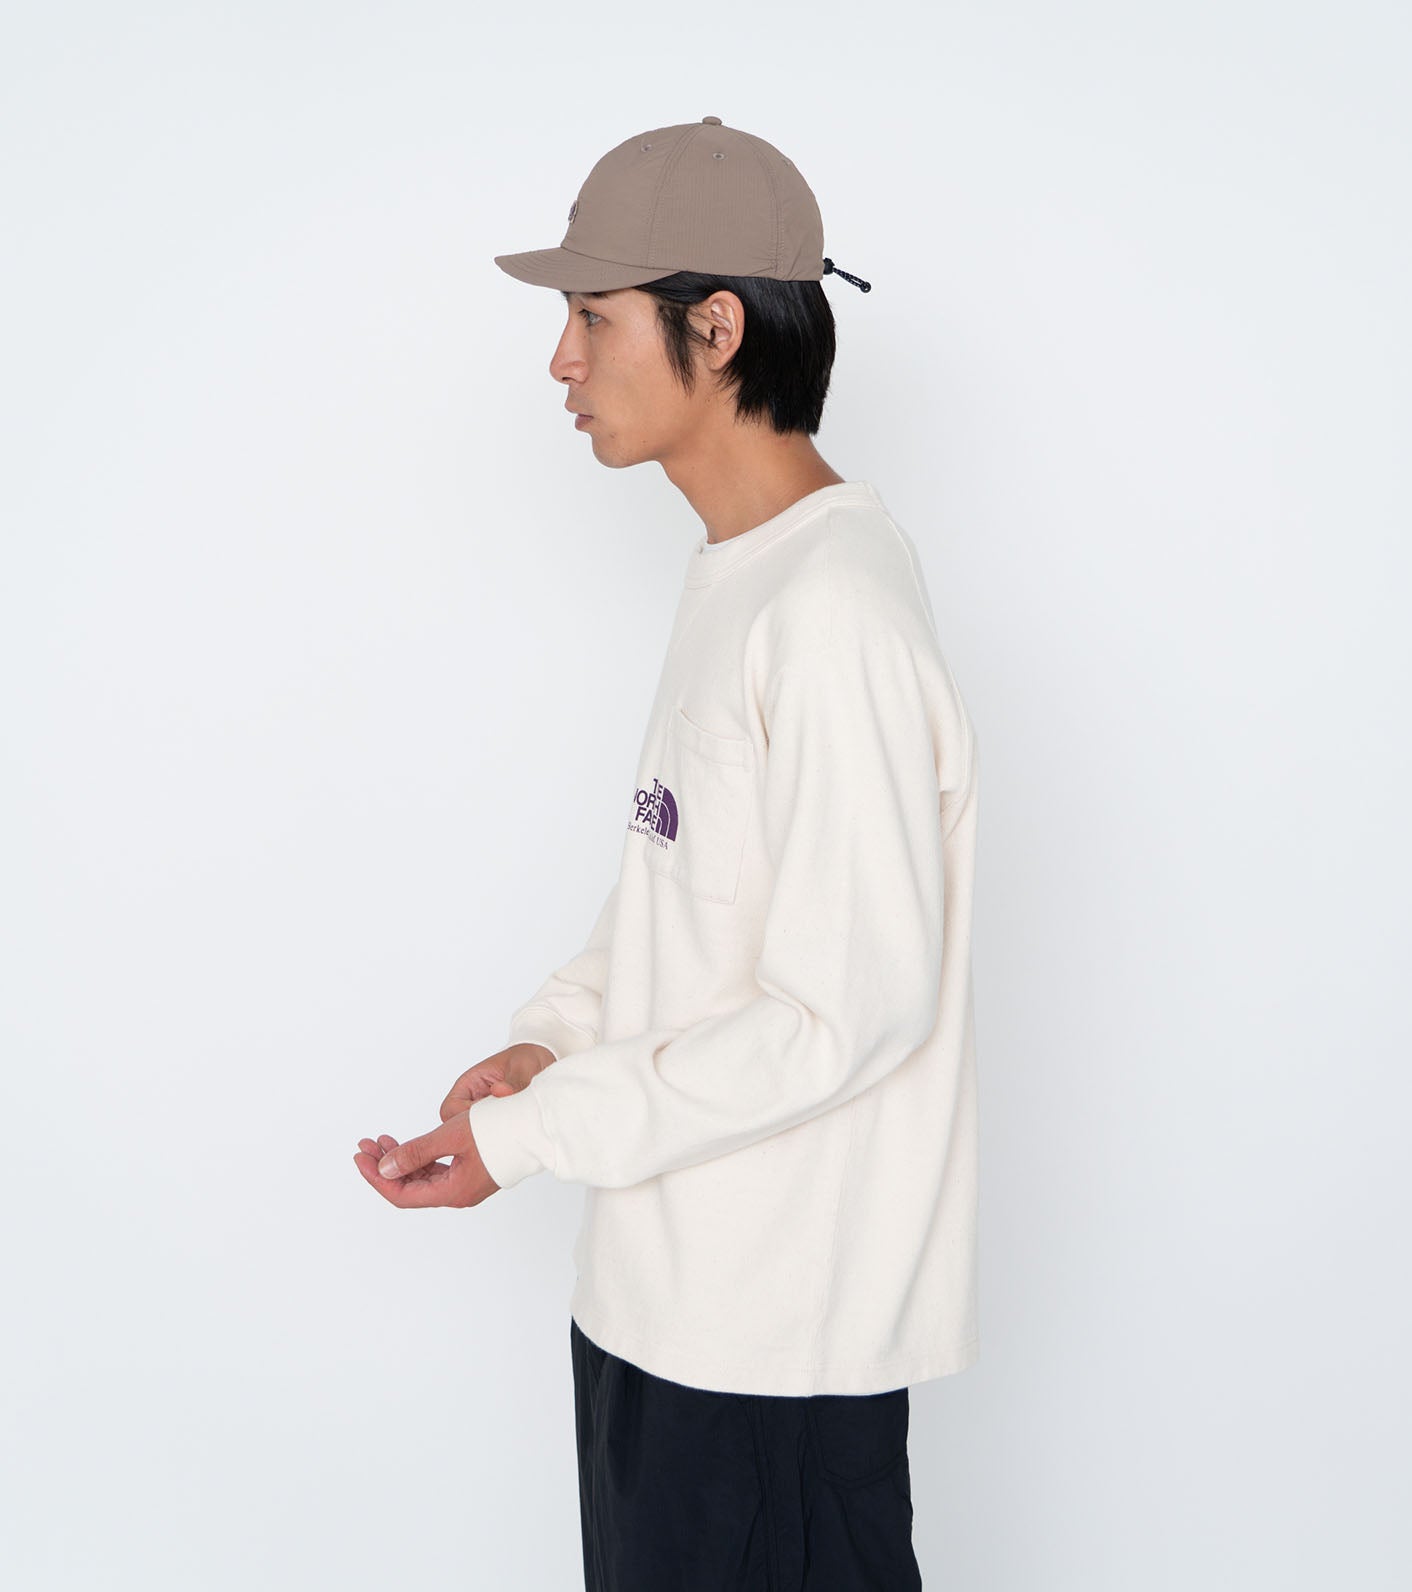 THE NORTH FACE PURPLE LABEL Field Long Sleeve Graphic Tee